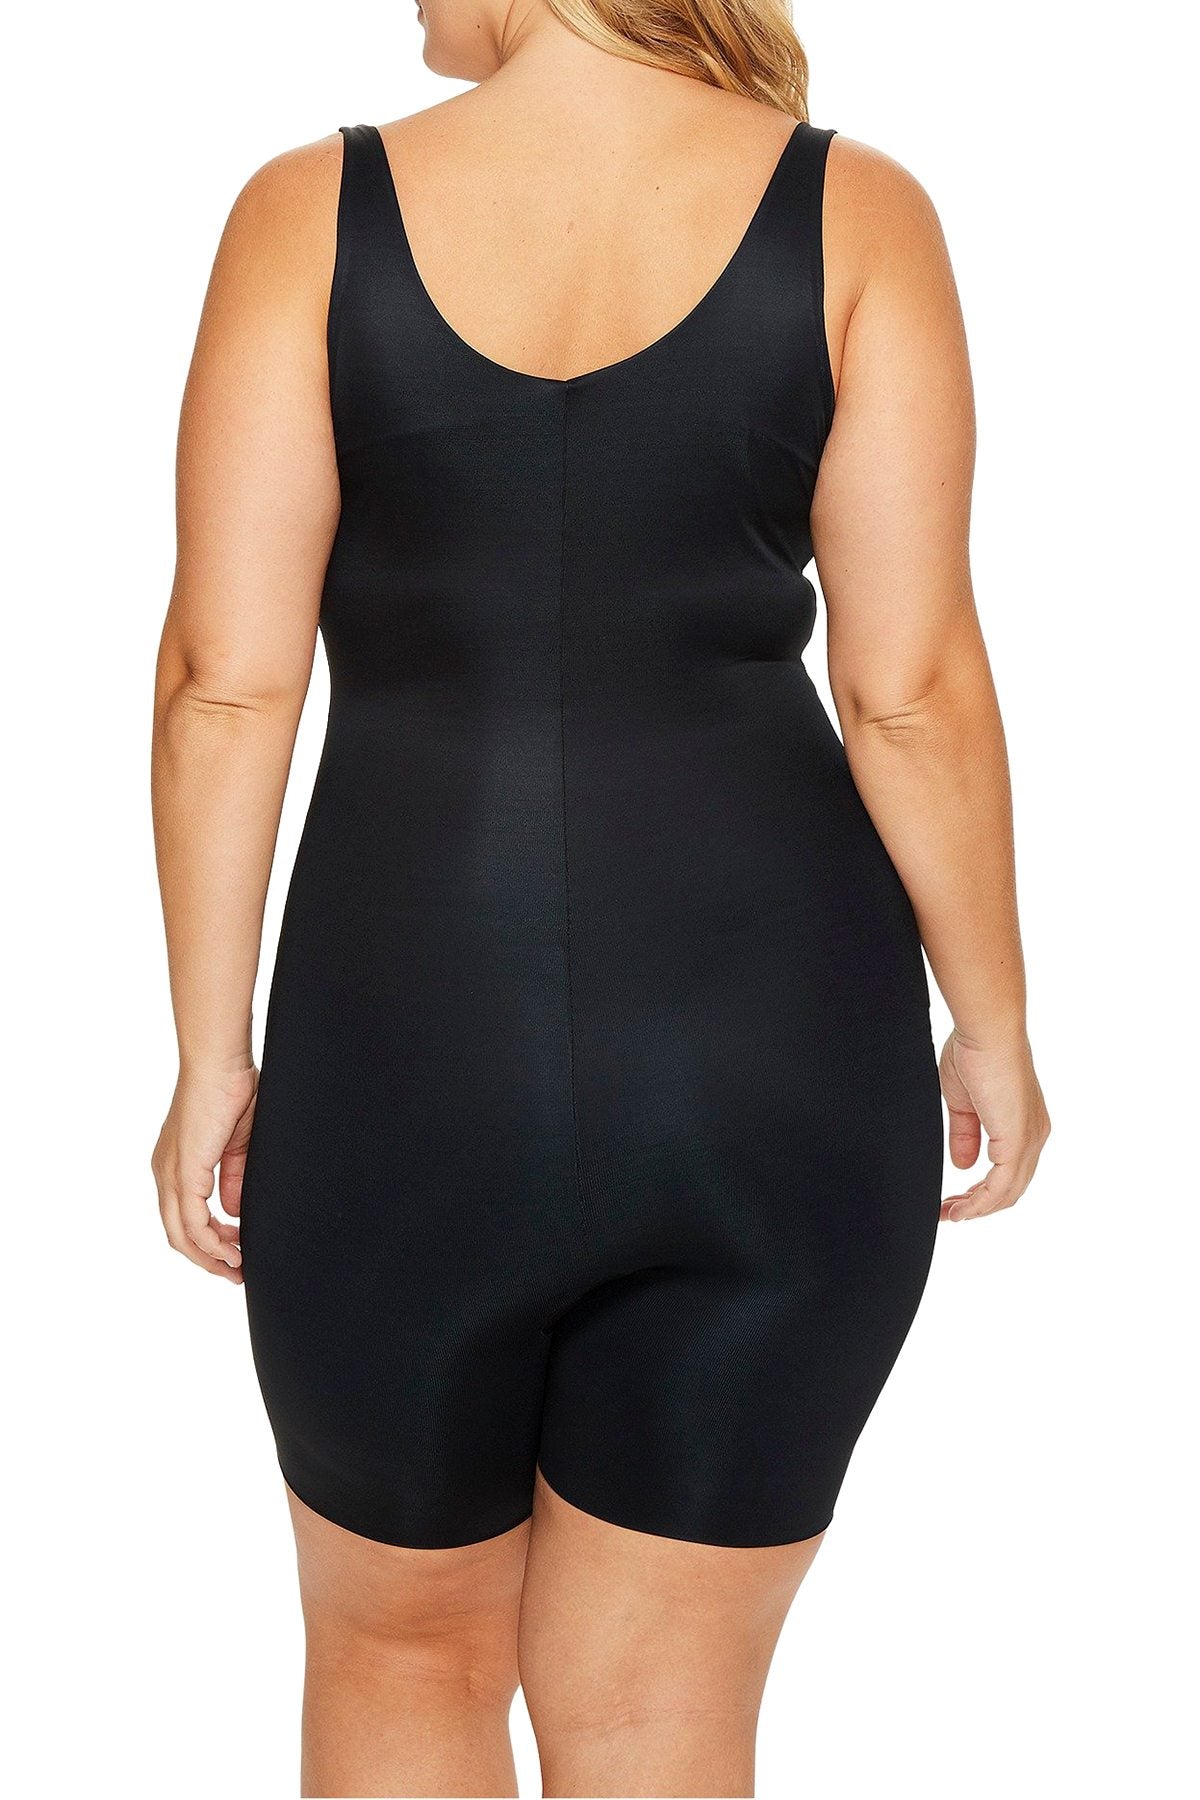 SPANX PLUS Black Power Conceal-Her Open-Bust Mid-Thigh Bodysuit